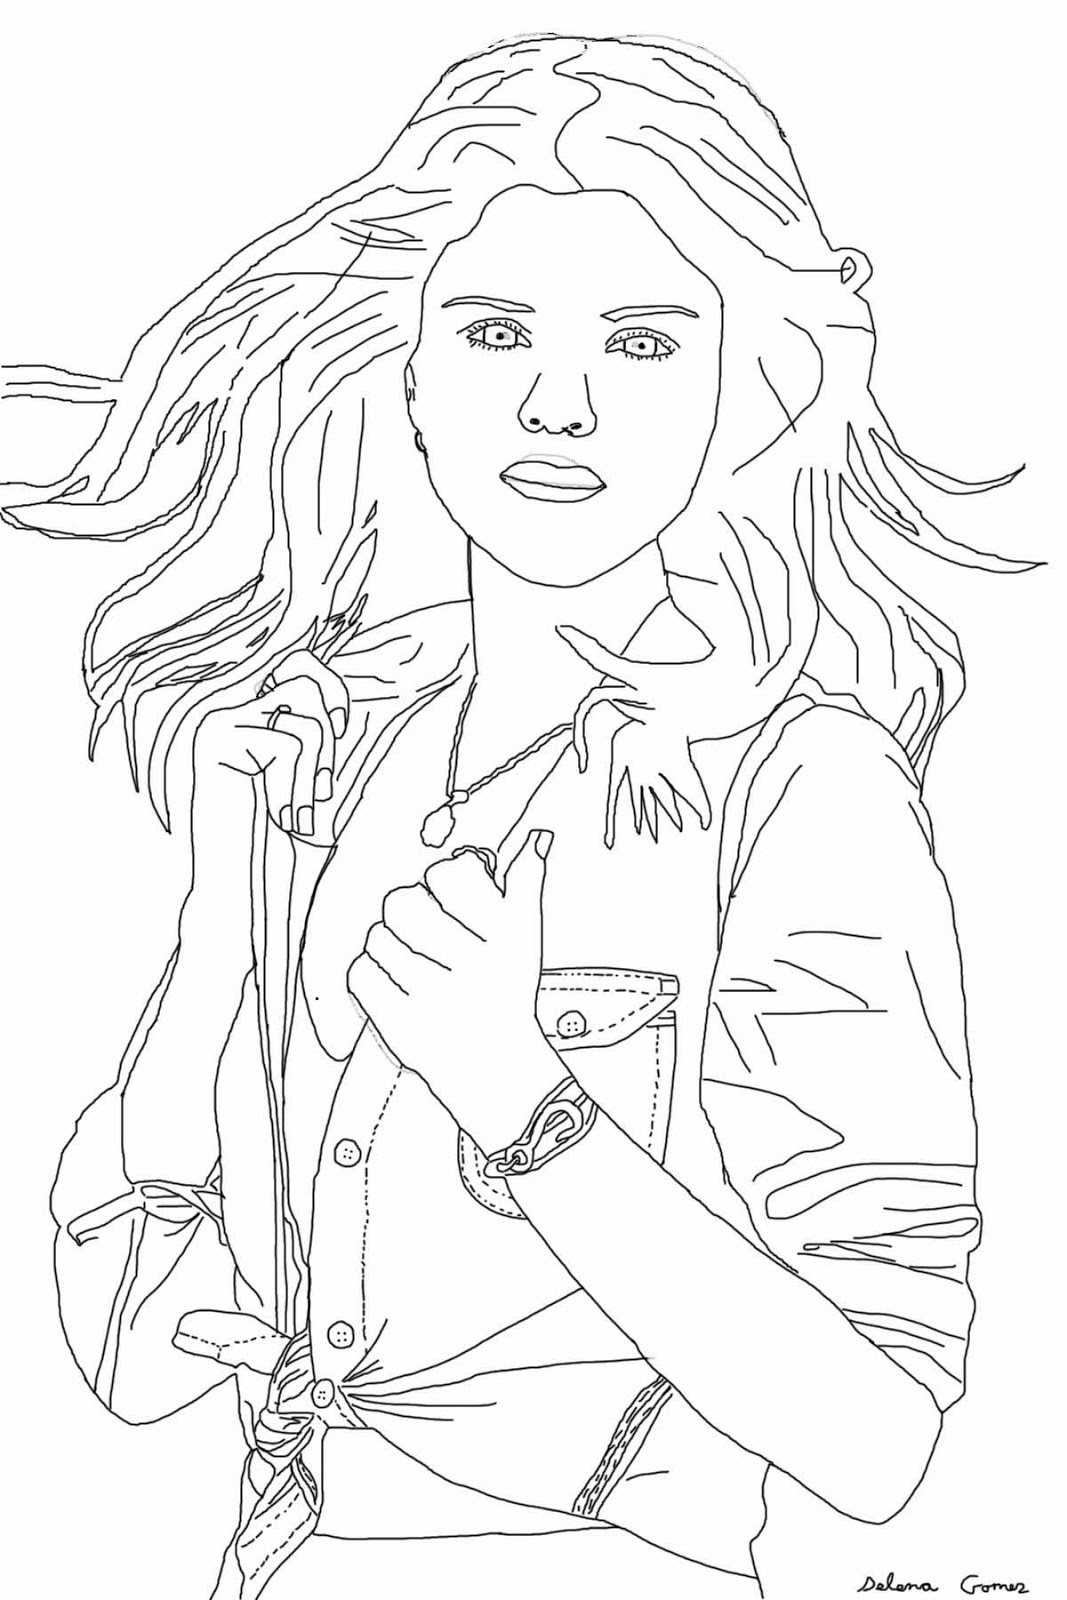 Selena Gomez 123827 (Celebrities) Printable coloring pages